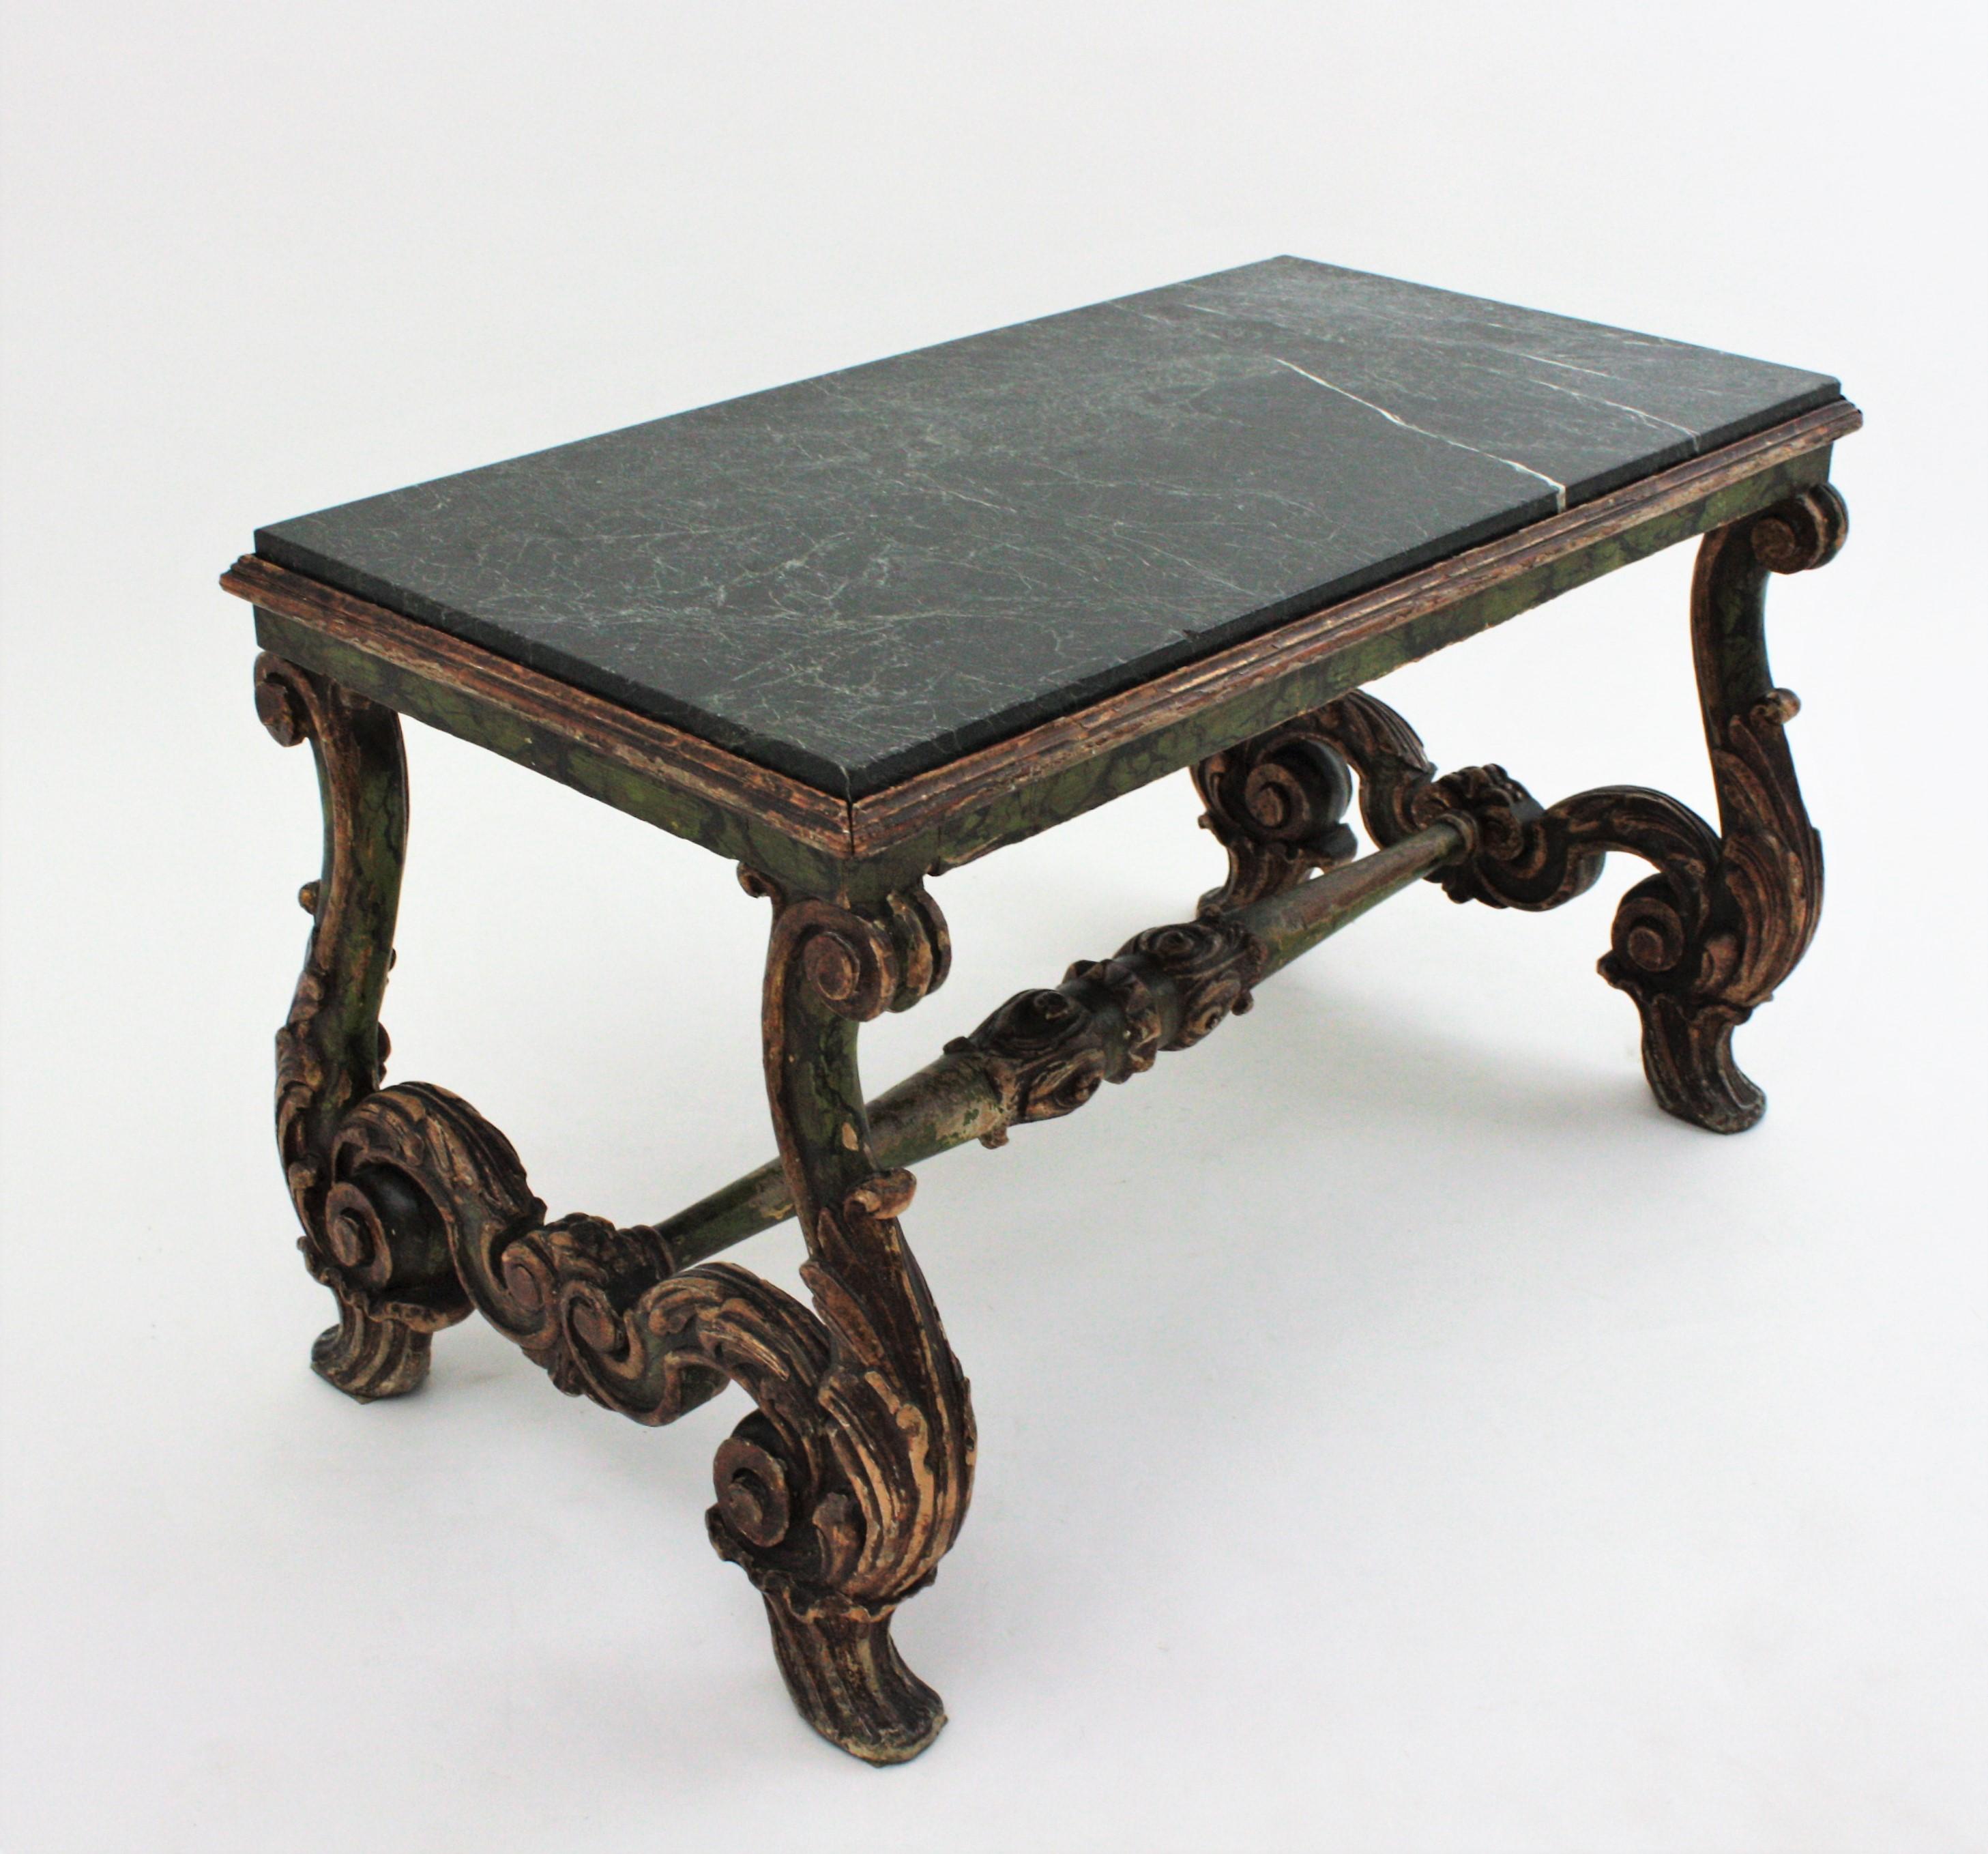 Spanish Baroque Carved Wood Coffee Table with Green Marble Top For Sale 2